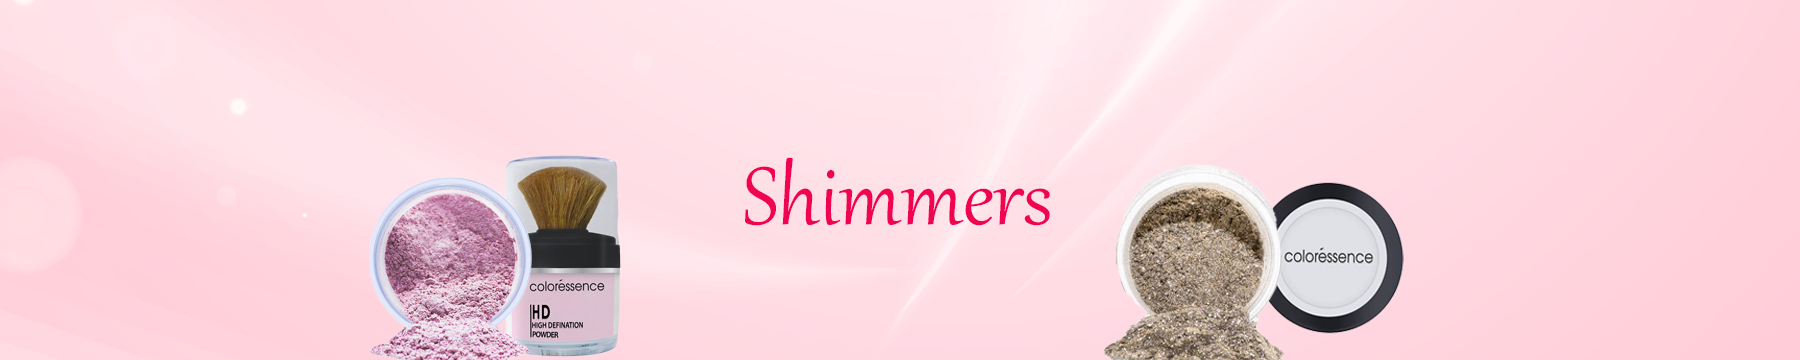 SHIMMERS